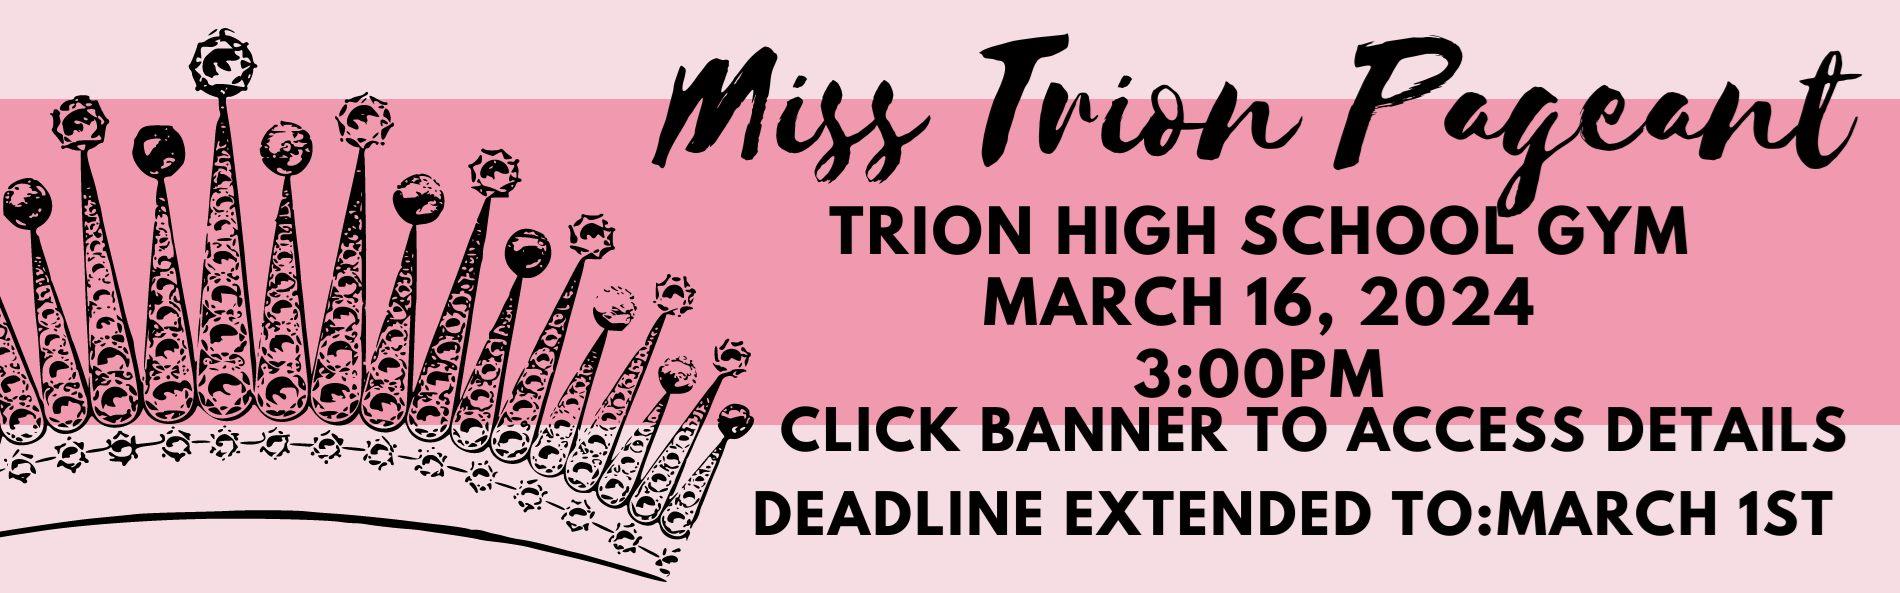 MISS TRION PAGEANT REGISTRATION INFORMATION AND FORM. PAGEANT WILL BE HELD ON MARCH 16TH AT 3PM